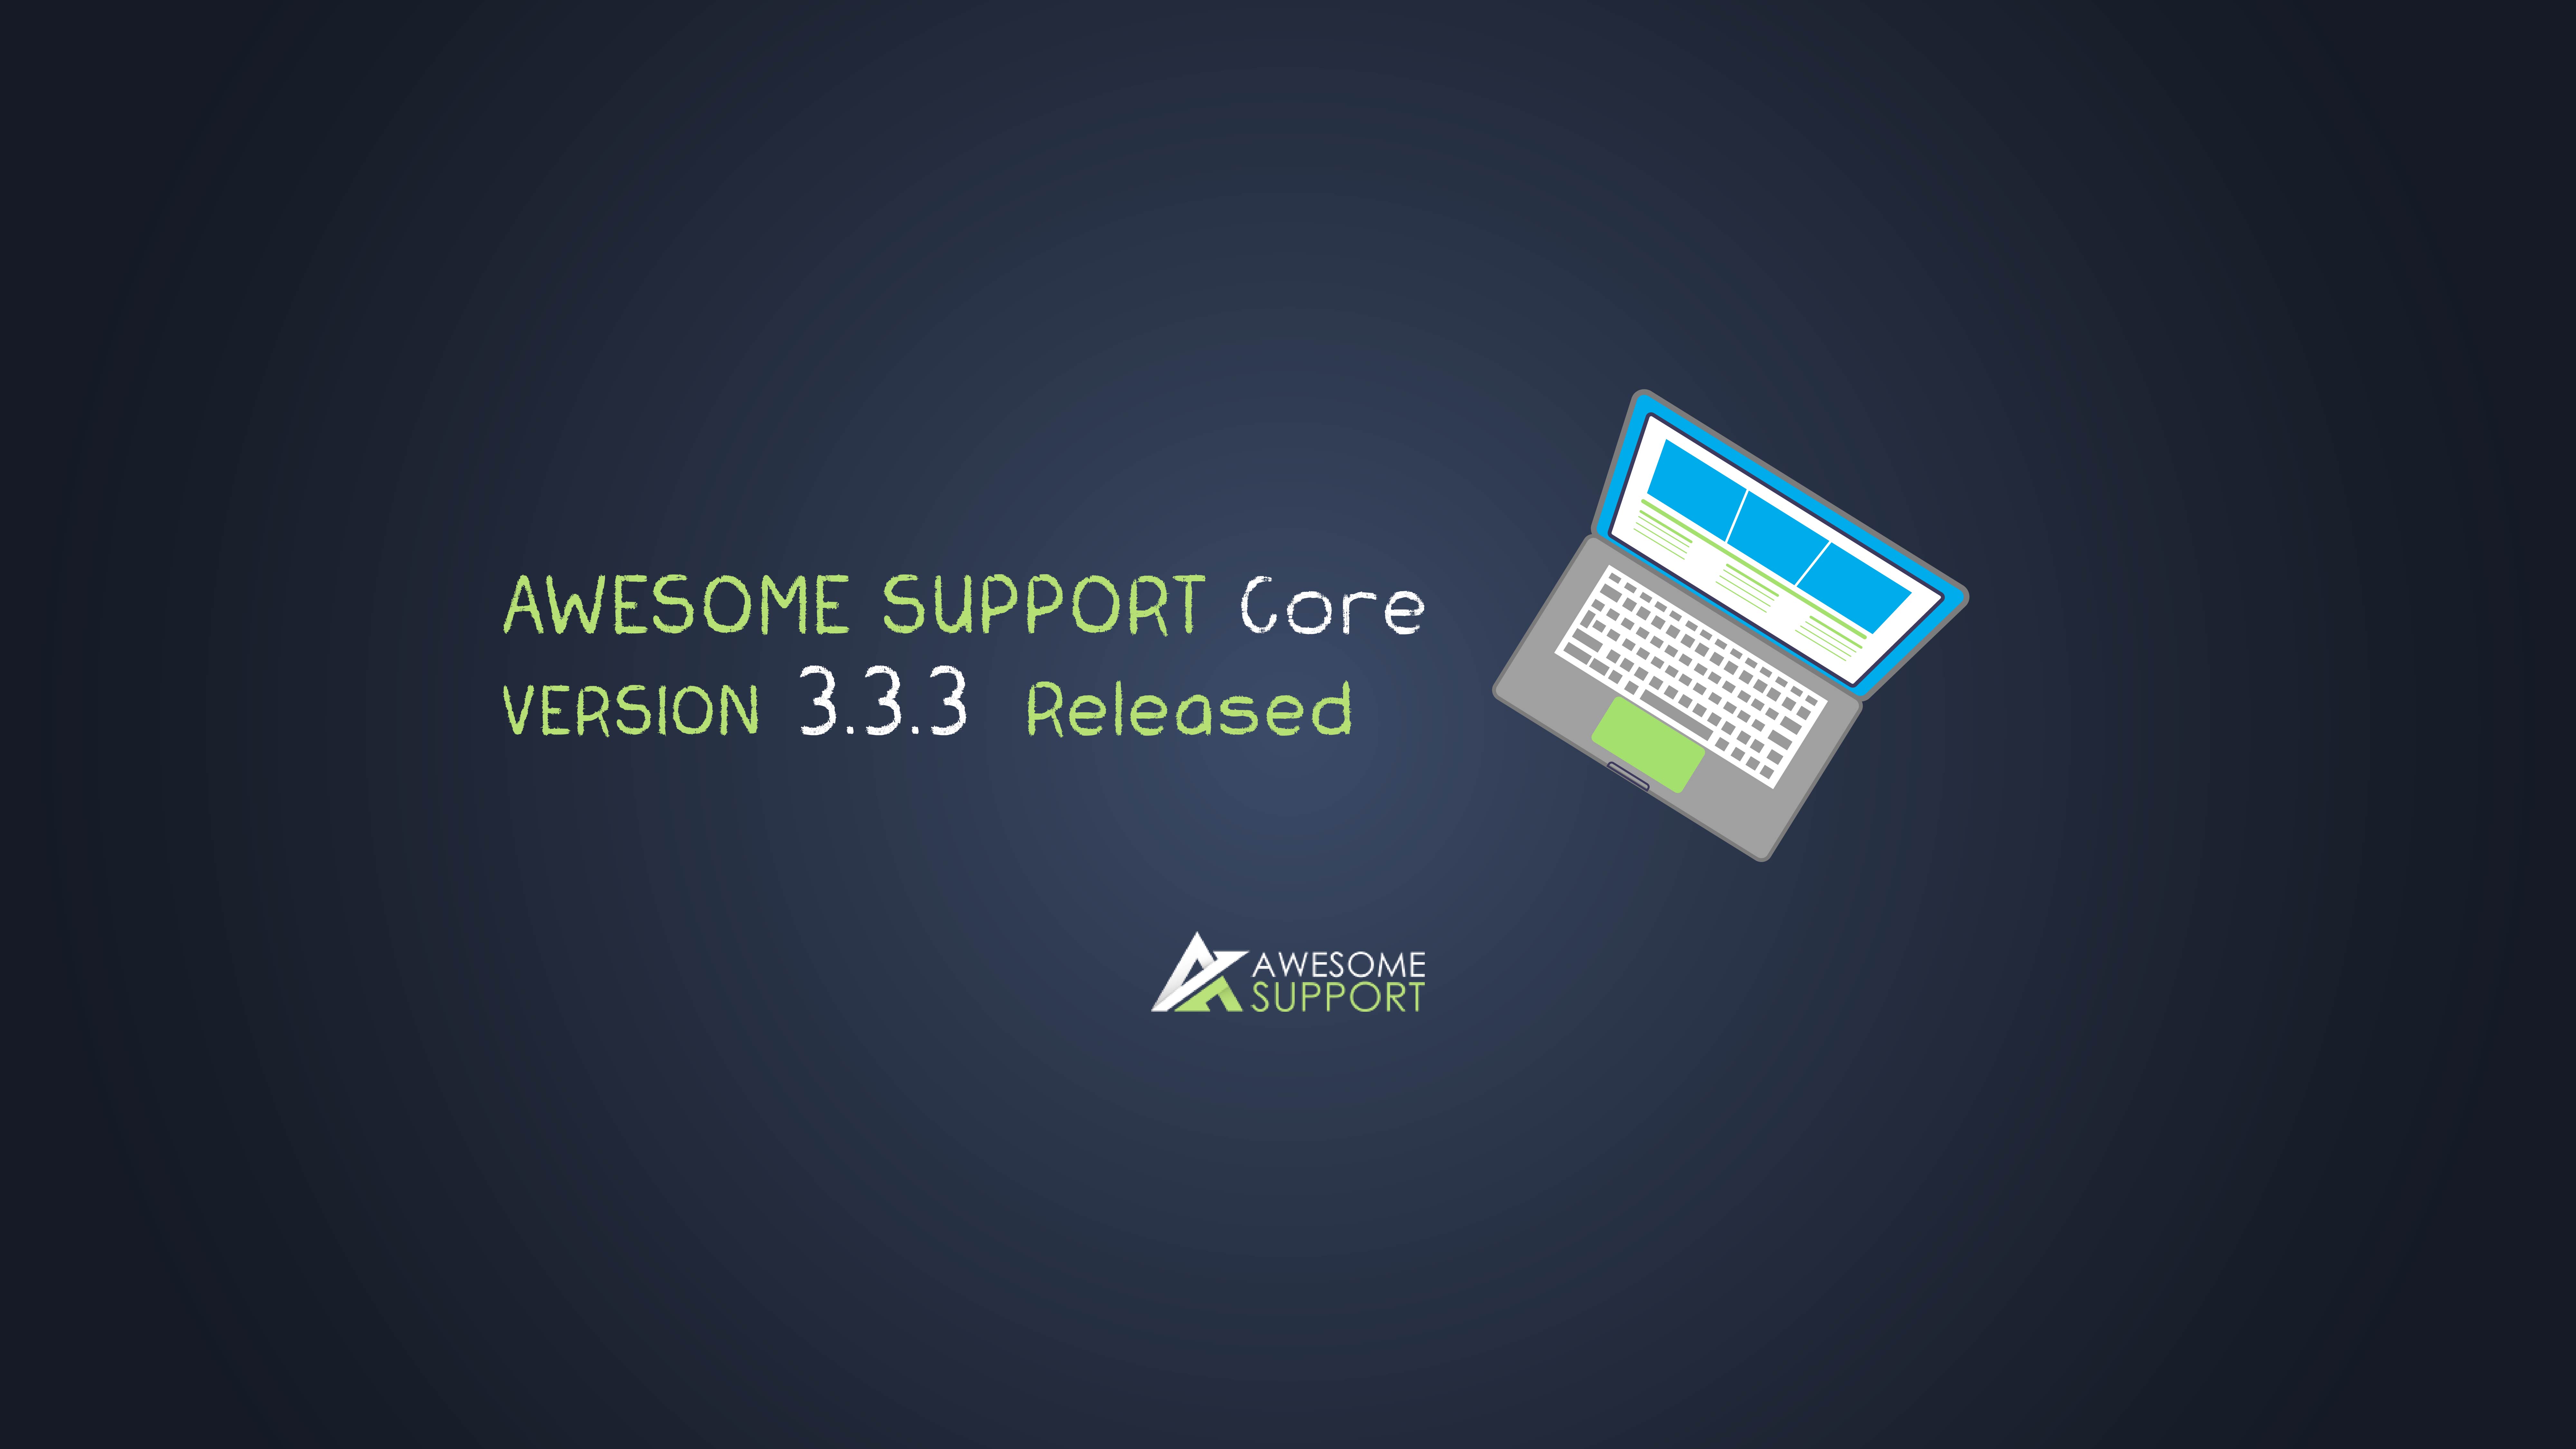 Awesome Support Core Version 3.3.3 Released